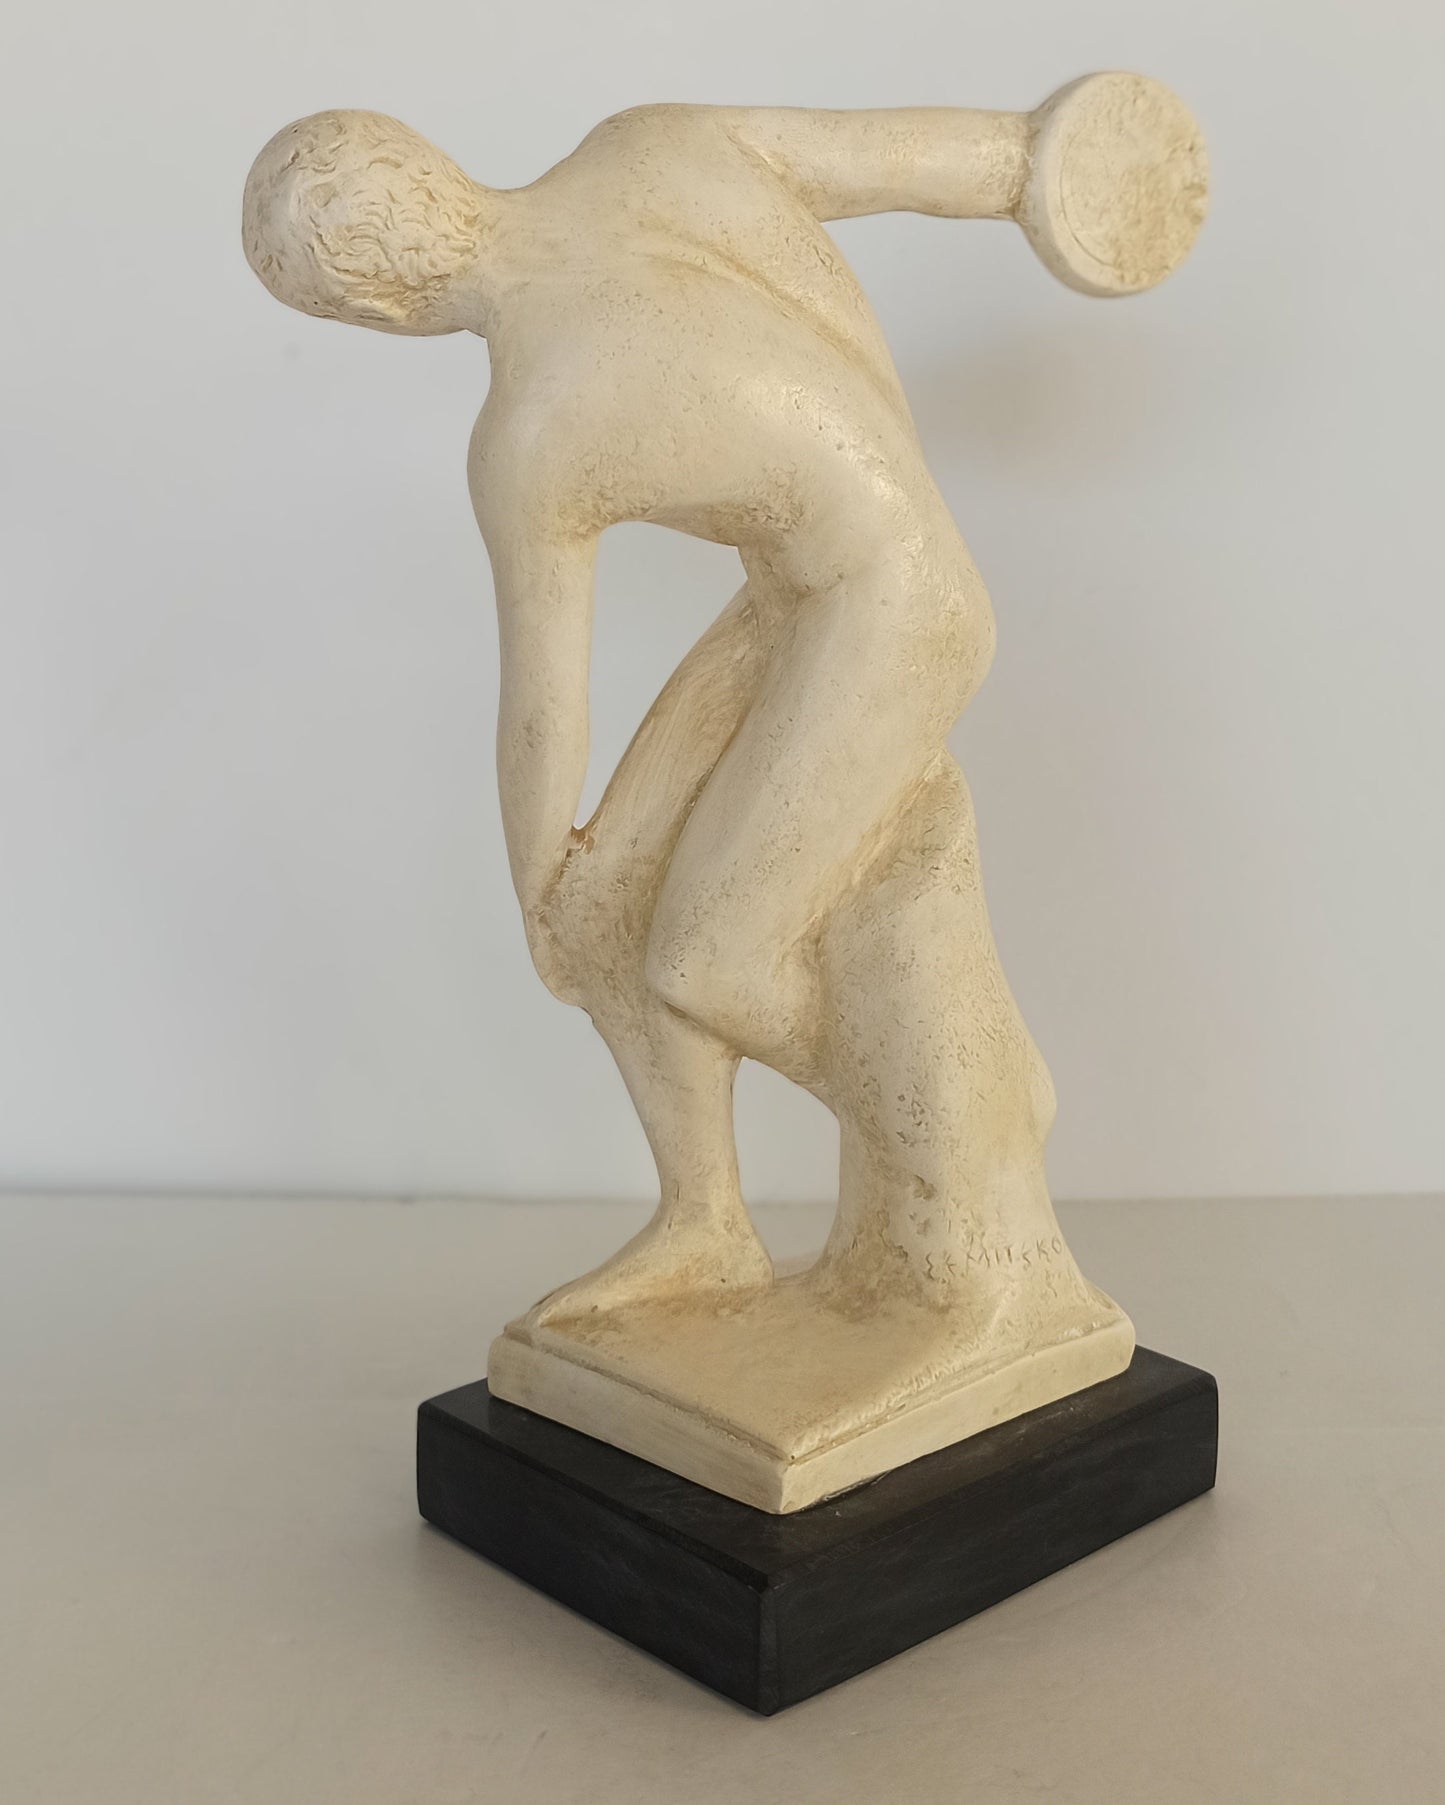 Discobolus of Myron - Discus Thrower - Ancient Greek Olympic Games - Classical Period - Replica - Casting Stone